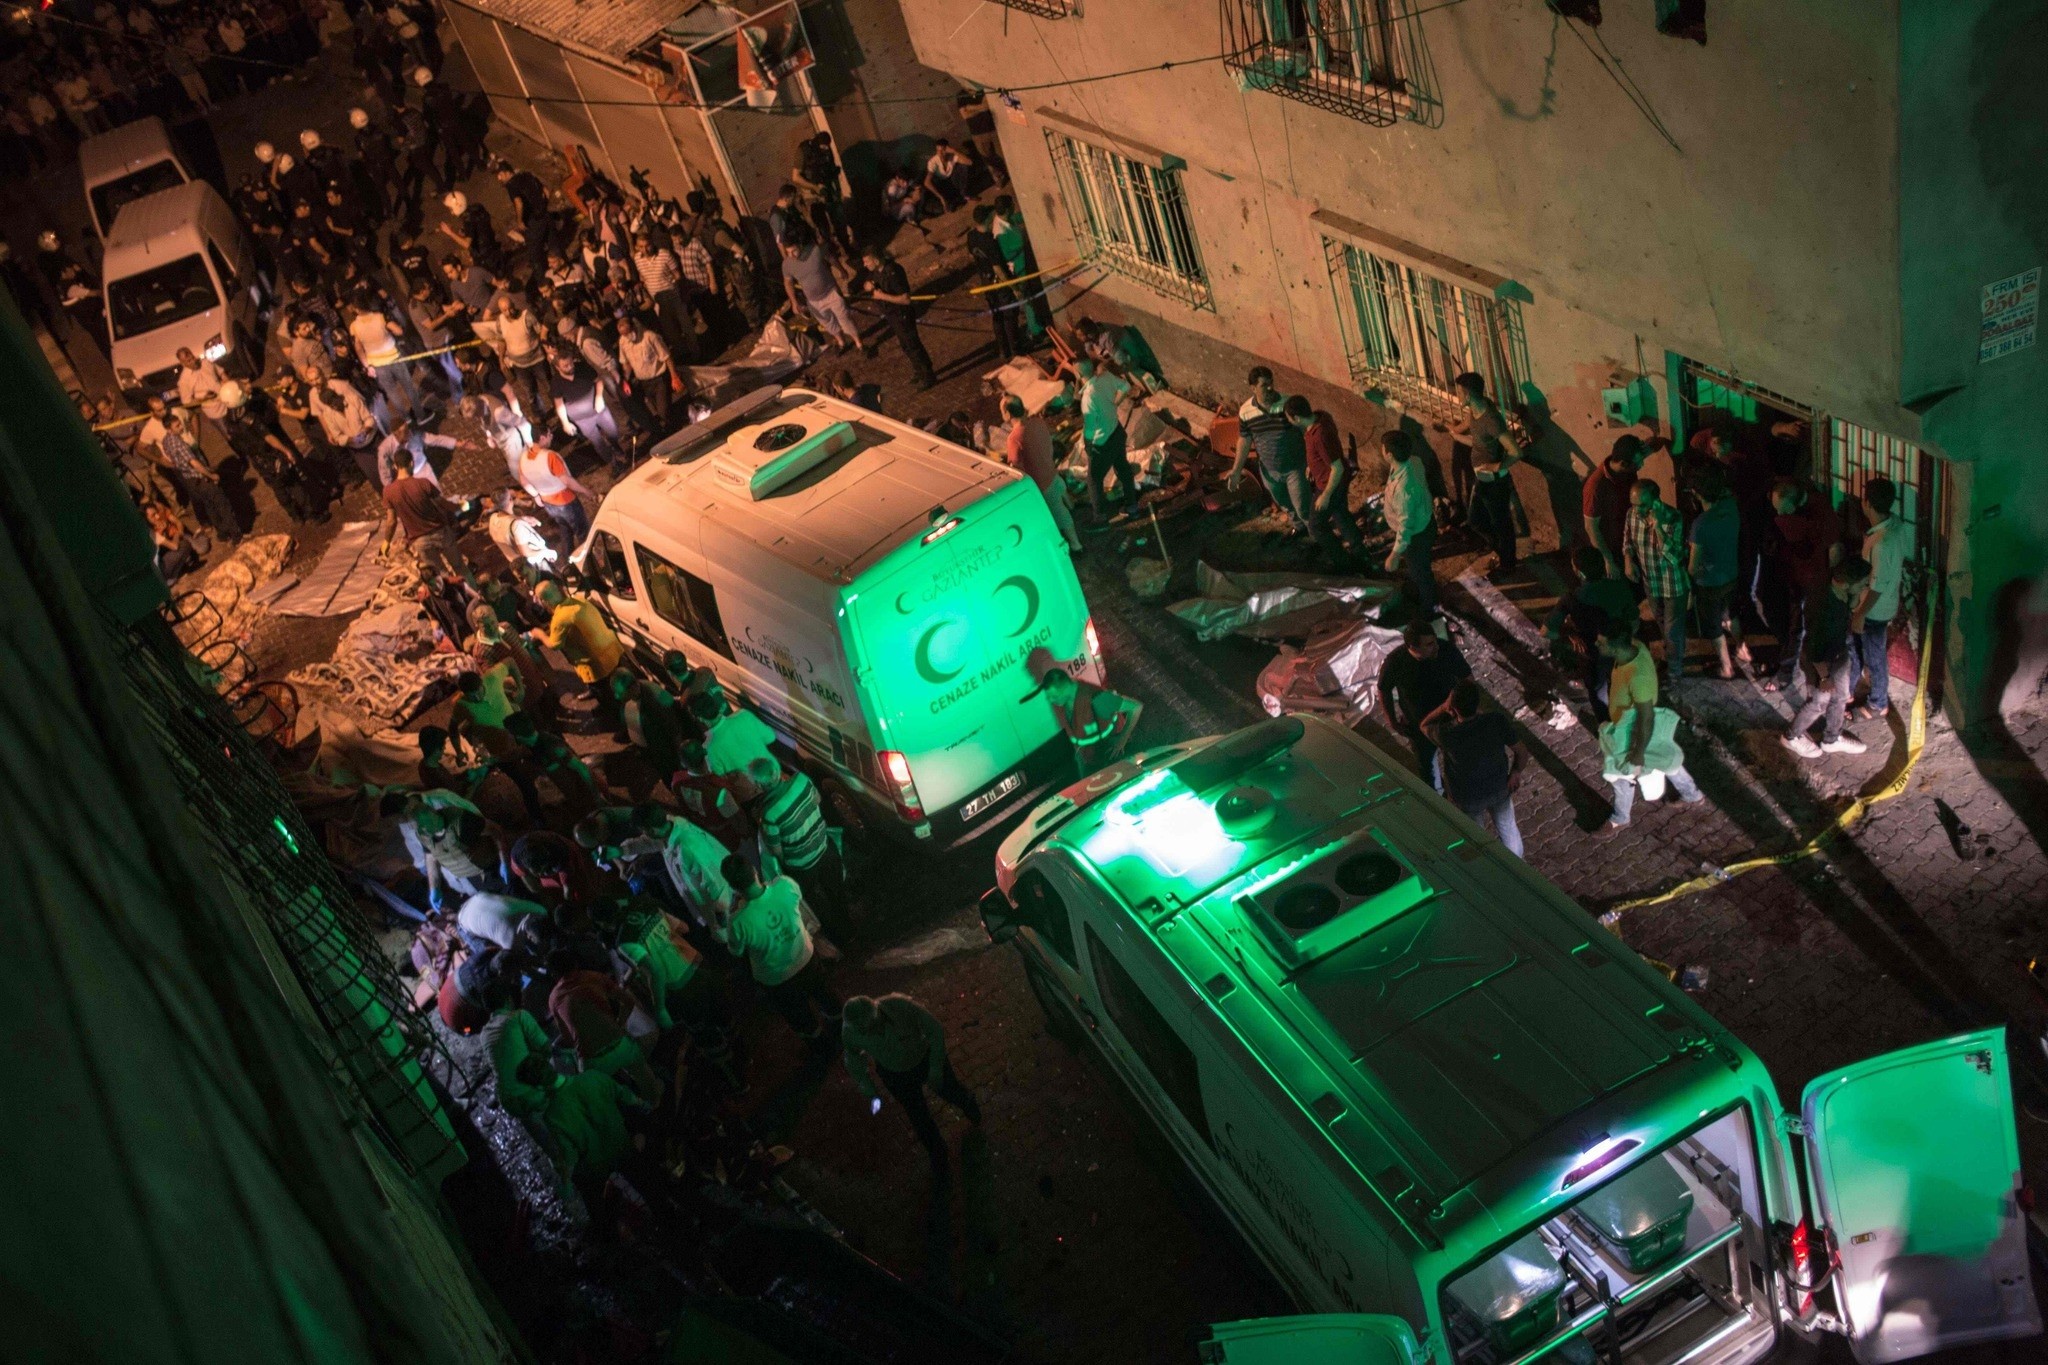 Ambulances arrive at site of an explosion on August 20, 2016 in Gaziantep following a late night militant attack on a wedding party in southeastern Turkey. (AFP Photo)